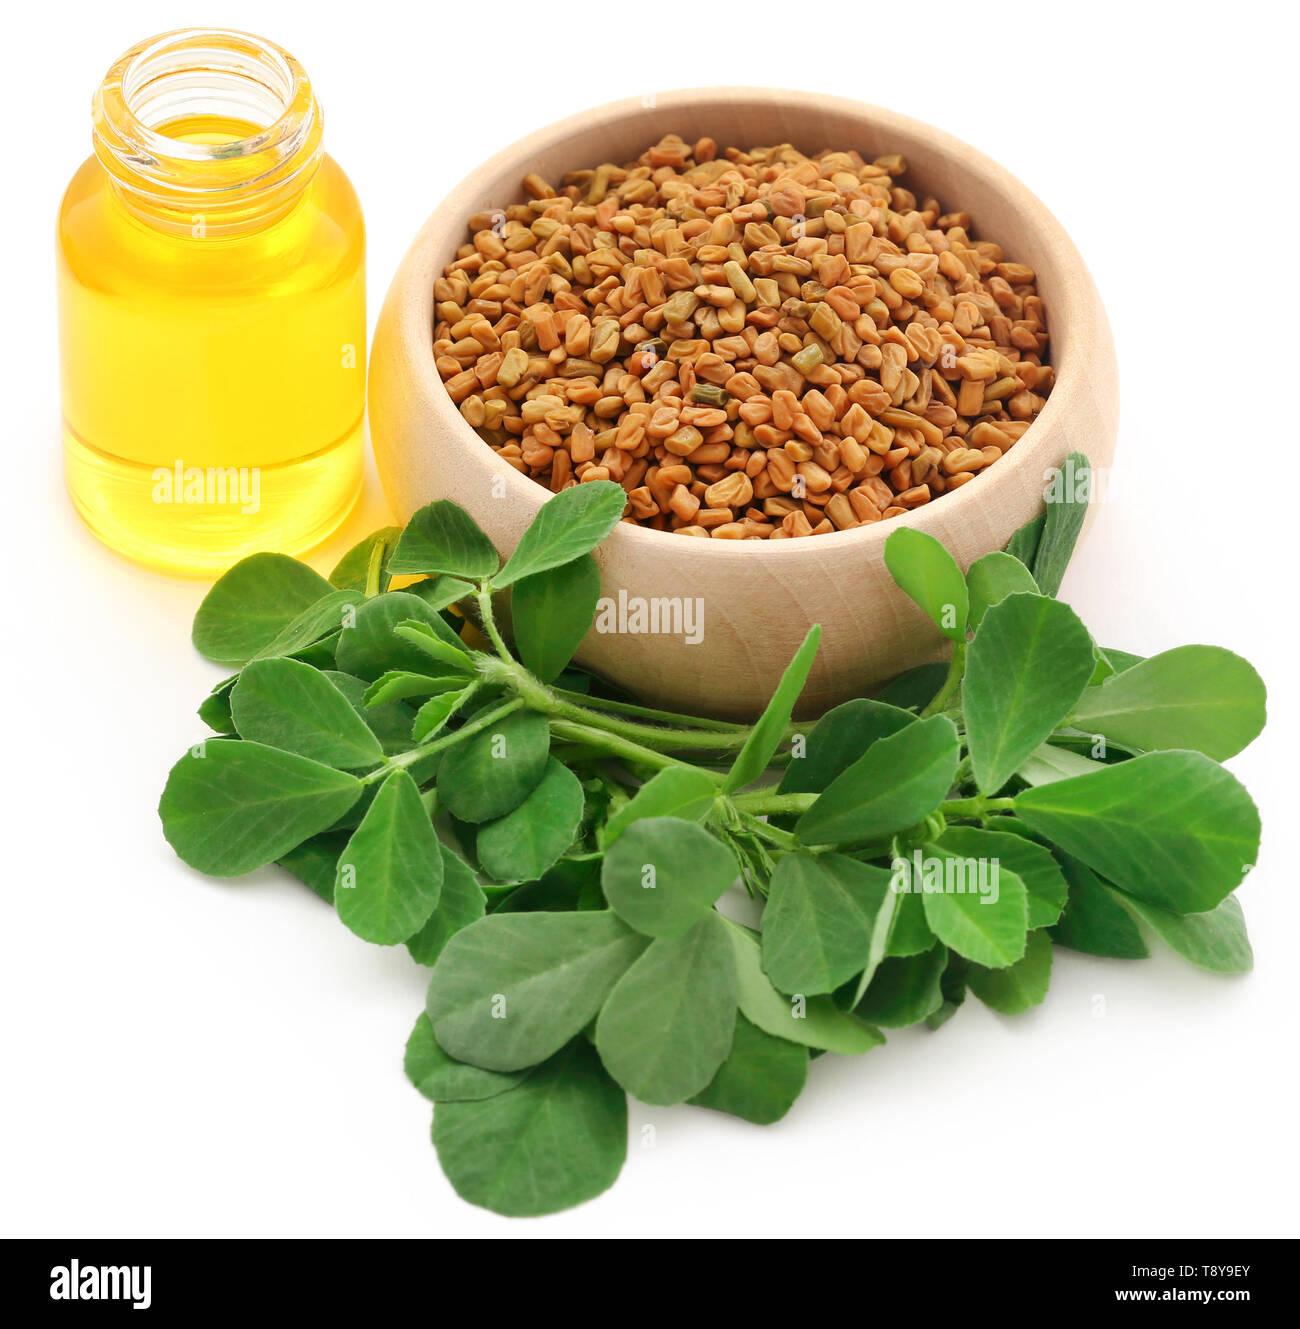 Fenugreek seeds and green leaves with oil in bottle over white background Stock Photo